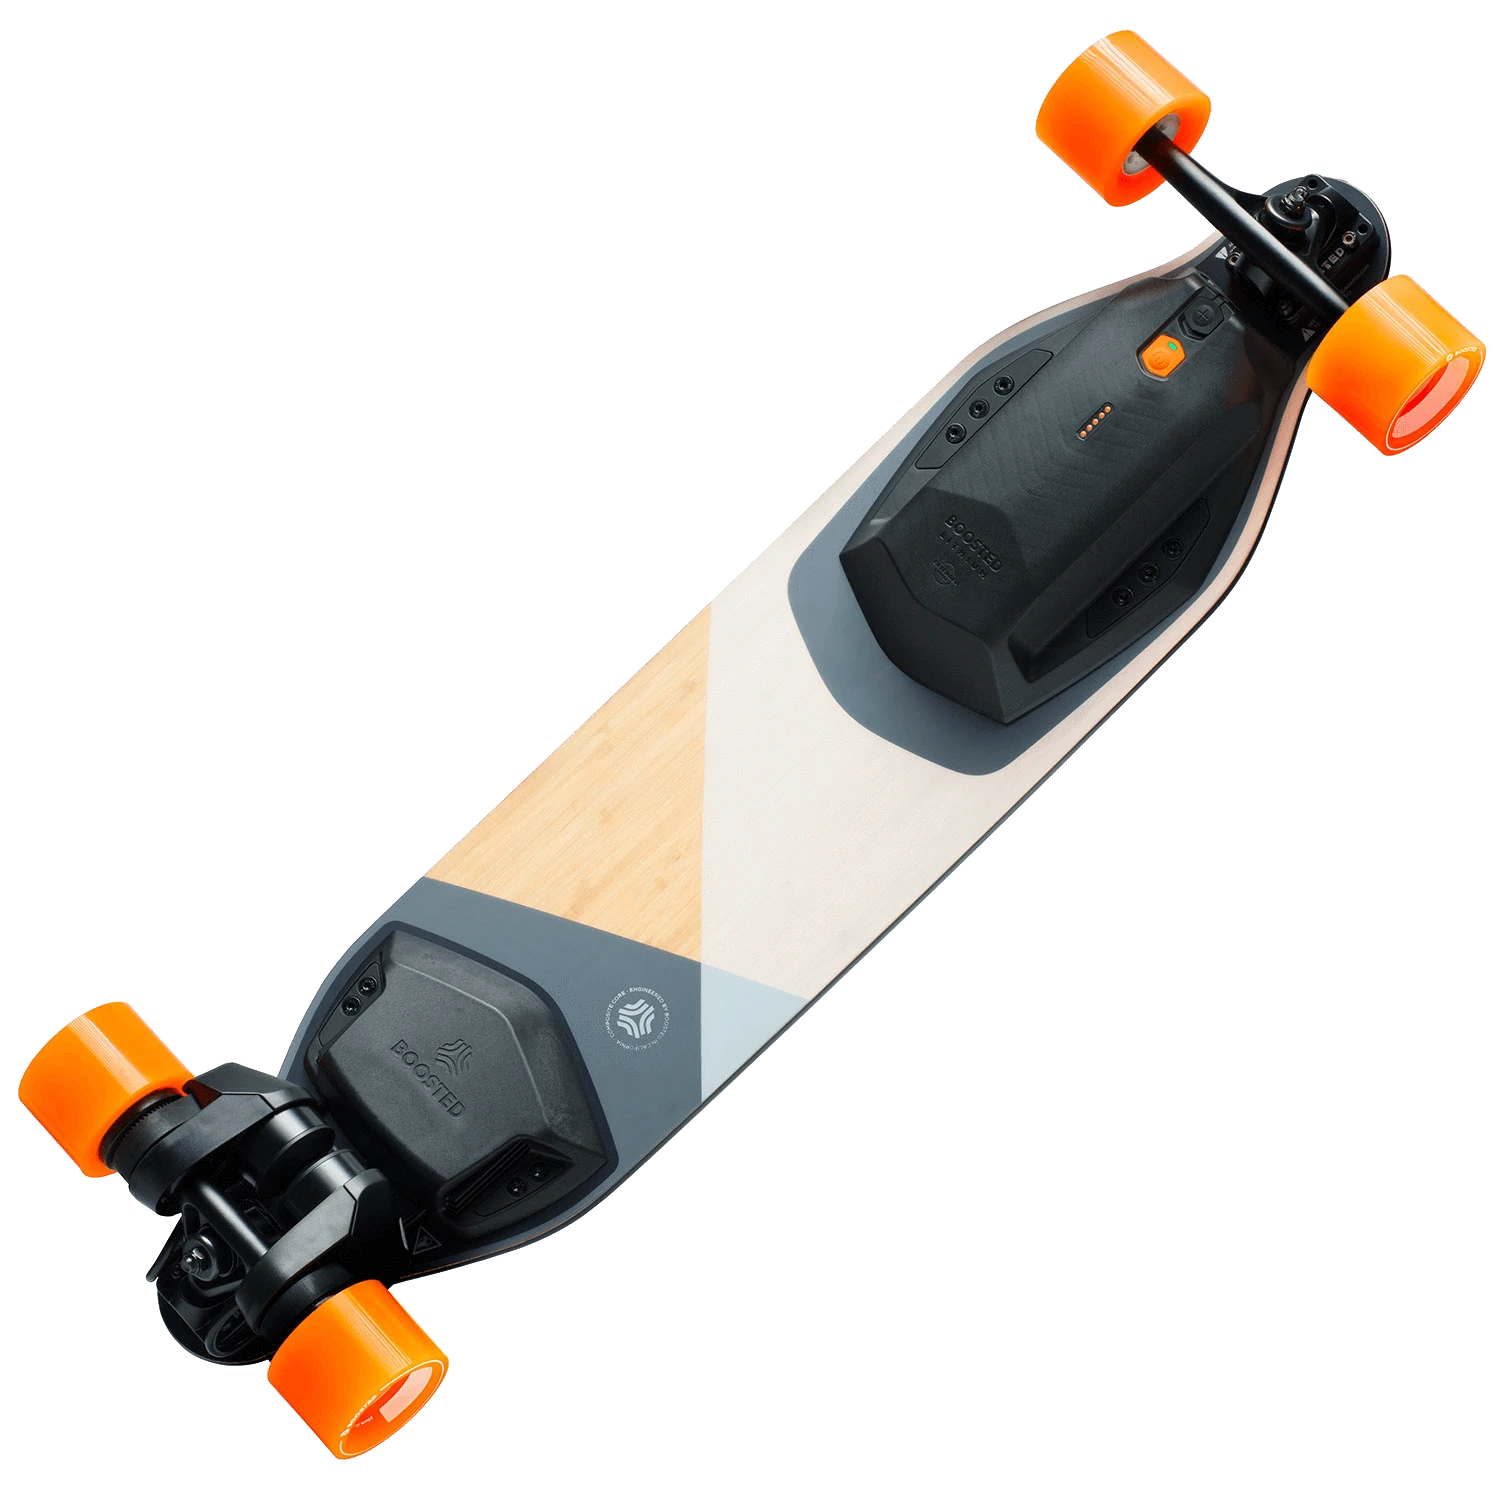 product named boosted plus in electric skateboards